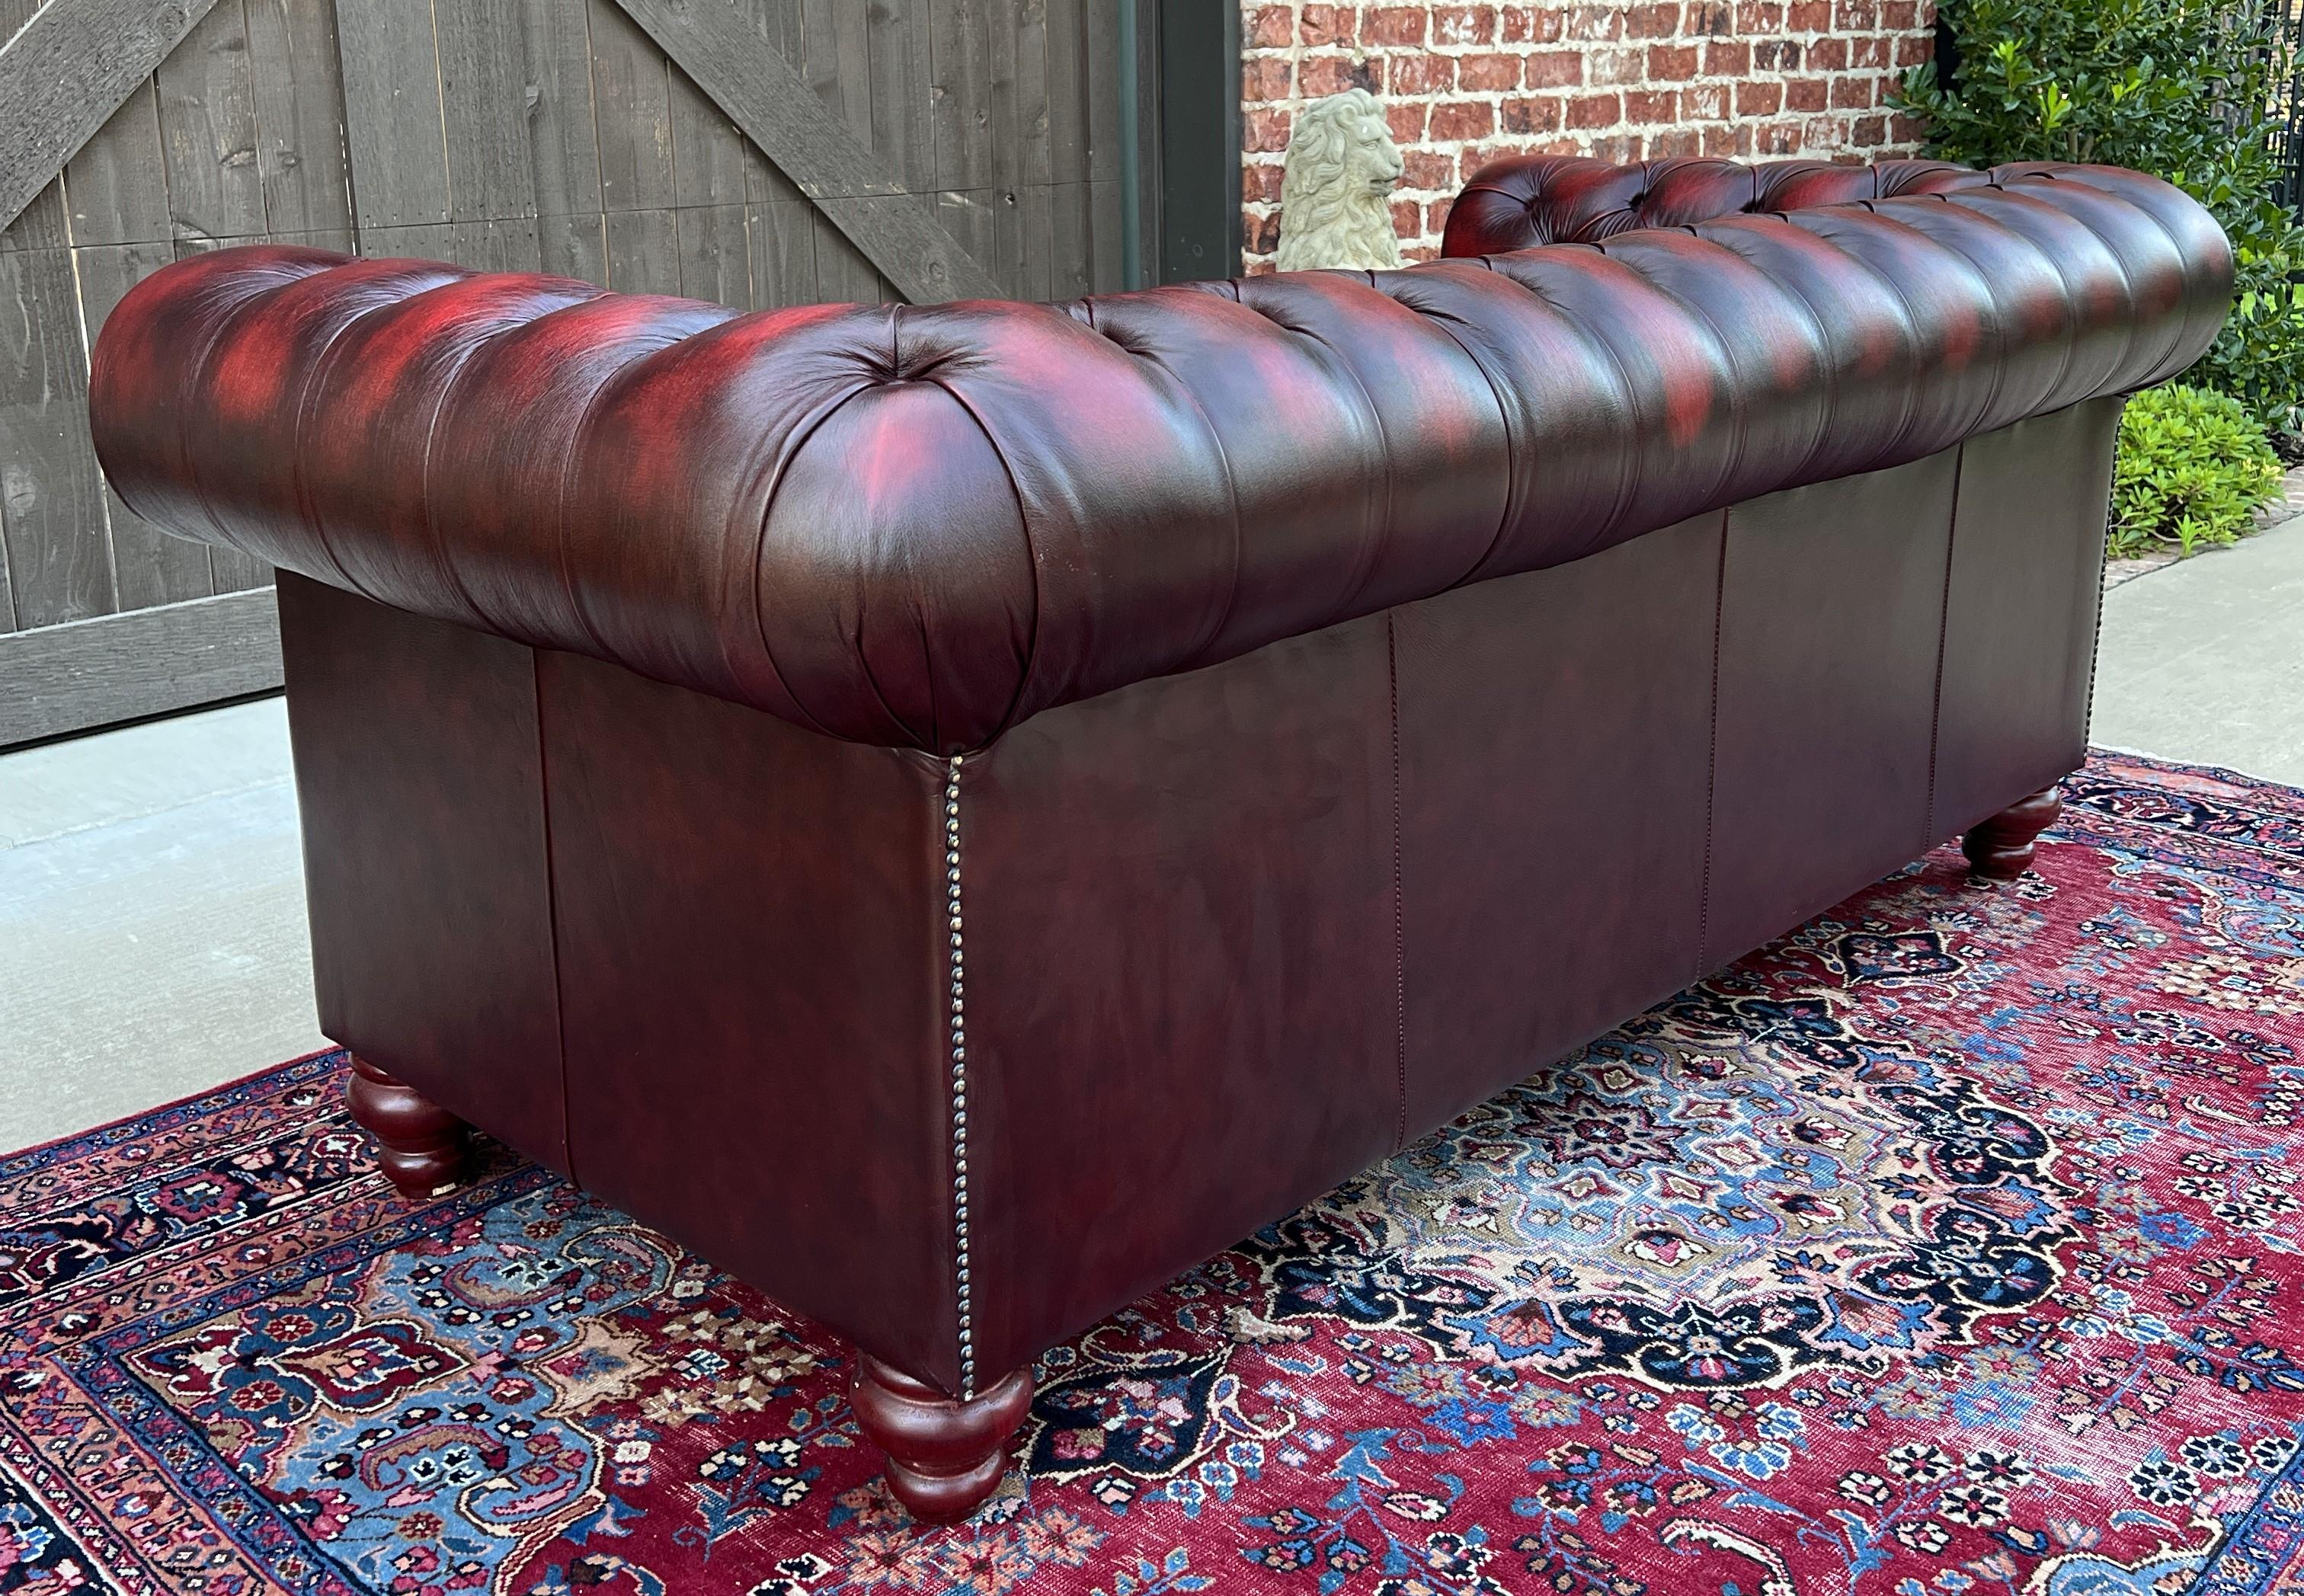 Vintage English Chesterfield Sofa Leather Tufted Seat Oxblood Red Mid-Century #1 12